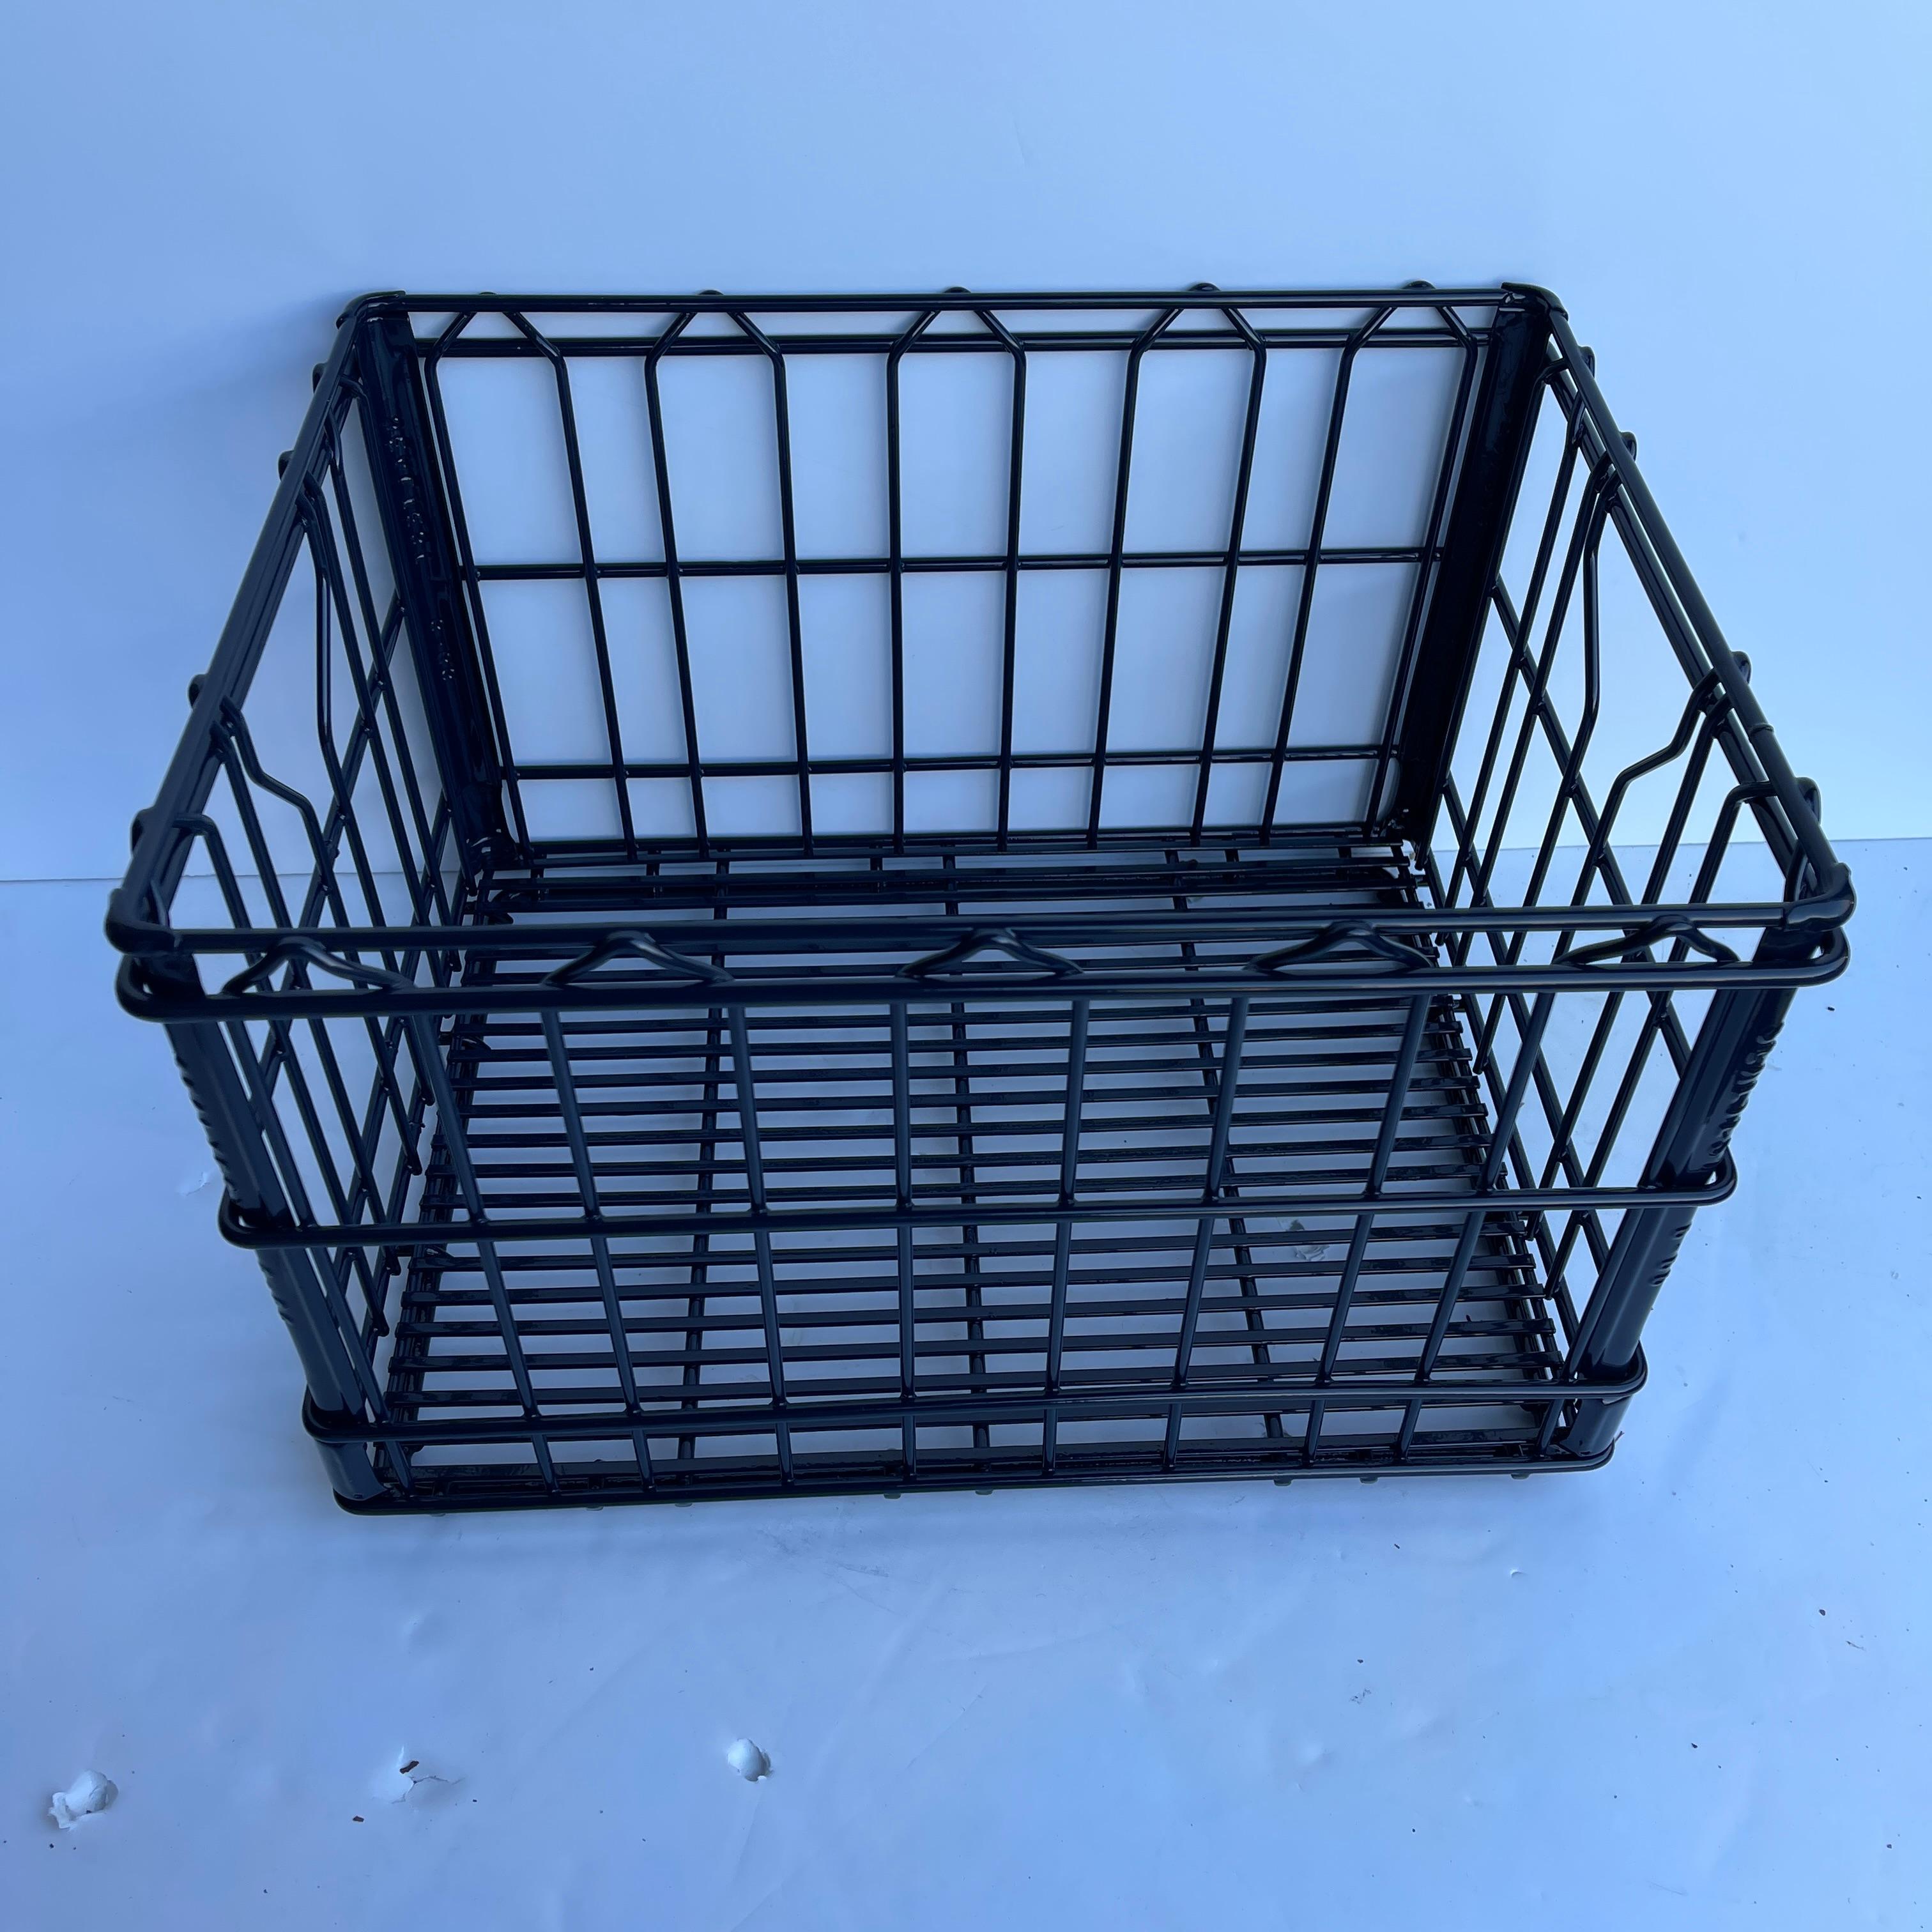 1960s Industrial Metal milk crate. Freshly powder coated, the milk crate is sturdy and sleek in classic navy blue. A perfect addition to any room that needs storage; for records, shoes or collectibles, the milk crate will hold your collectibles in